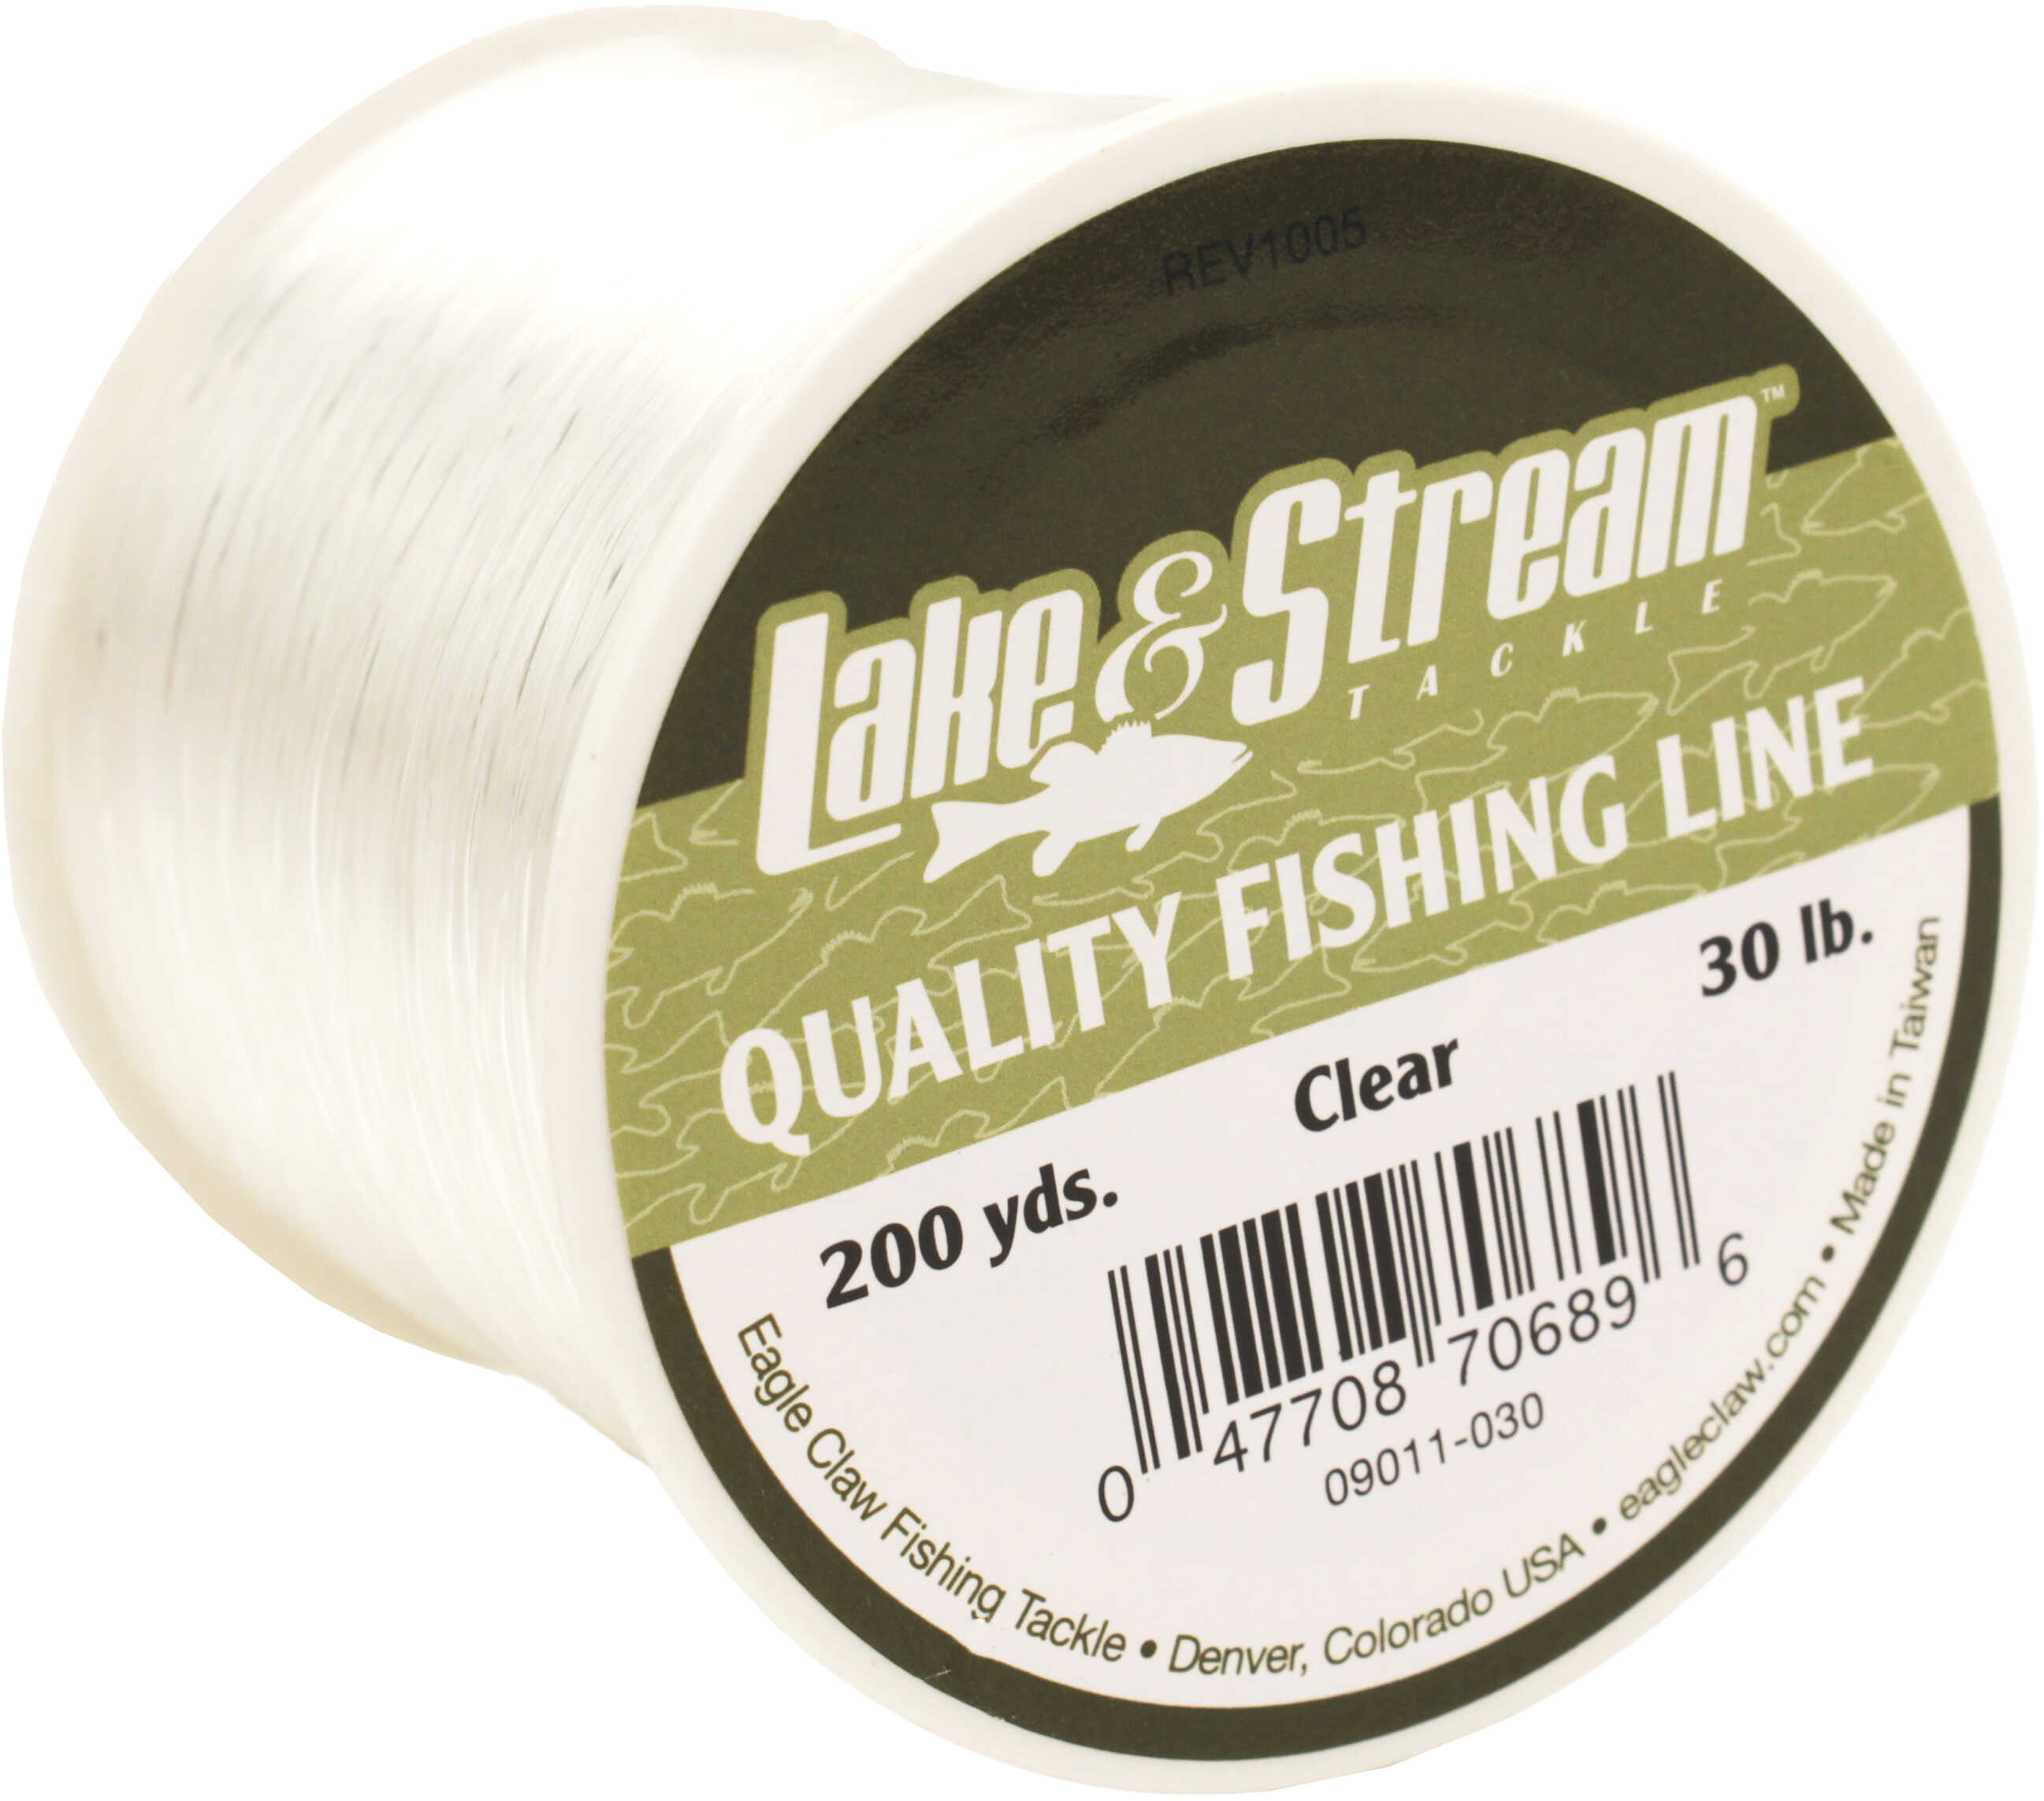 Eagle Claw Fishing Tackle Mono Line 30# 200yds Clear Md#: 09011-030